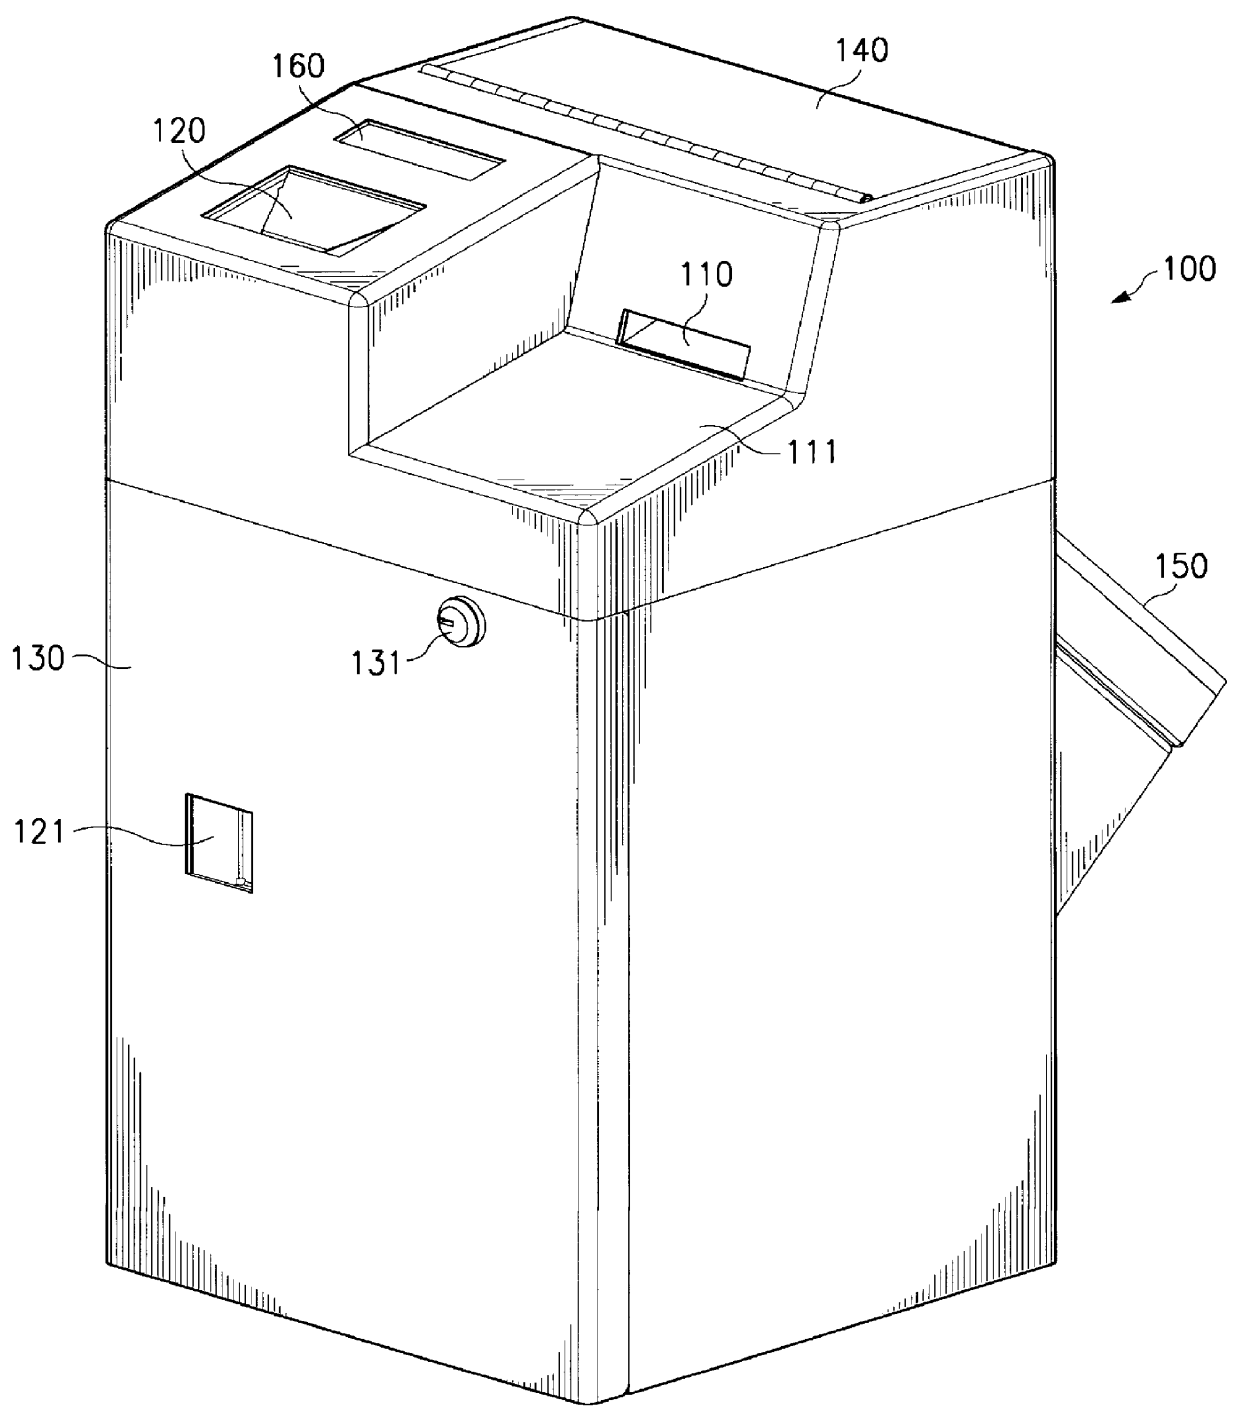 Automatic validating farebox system and method